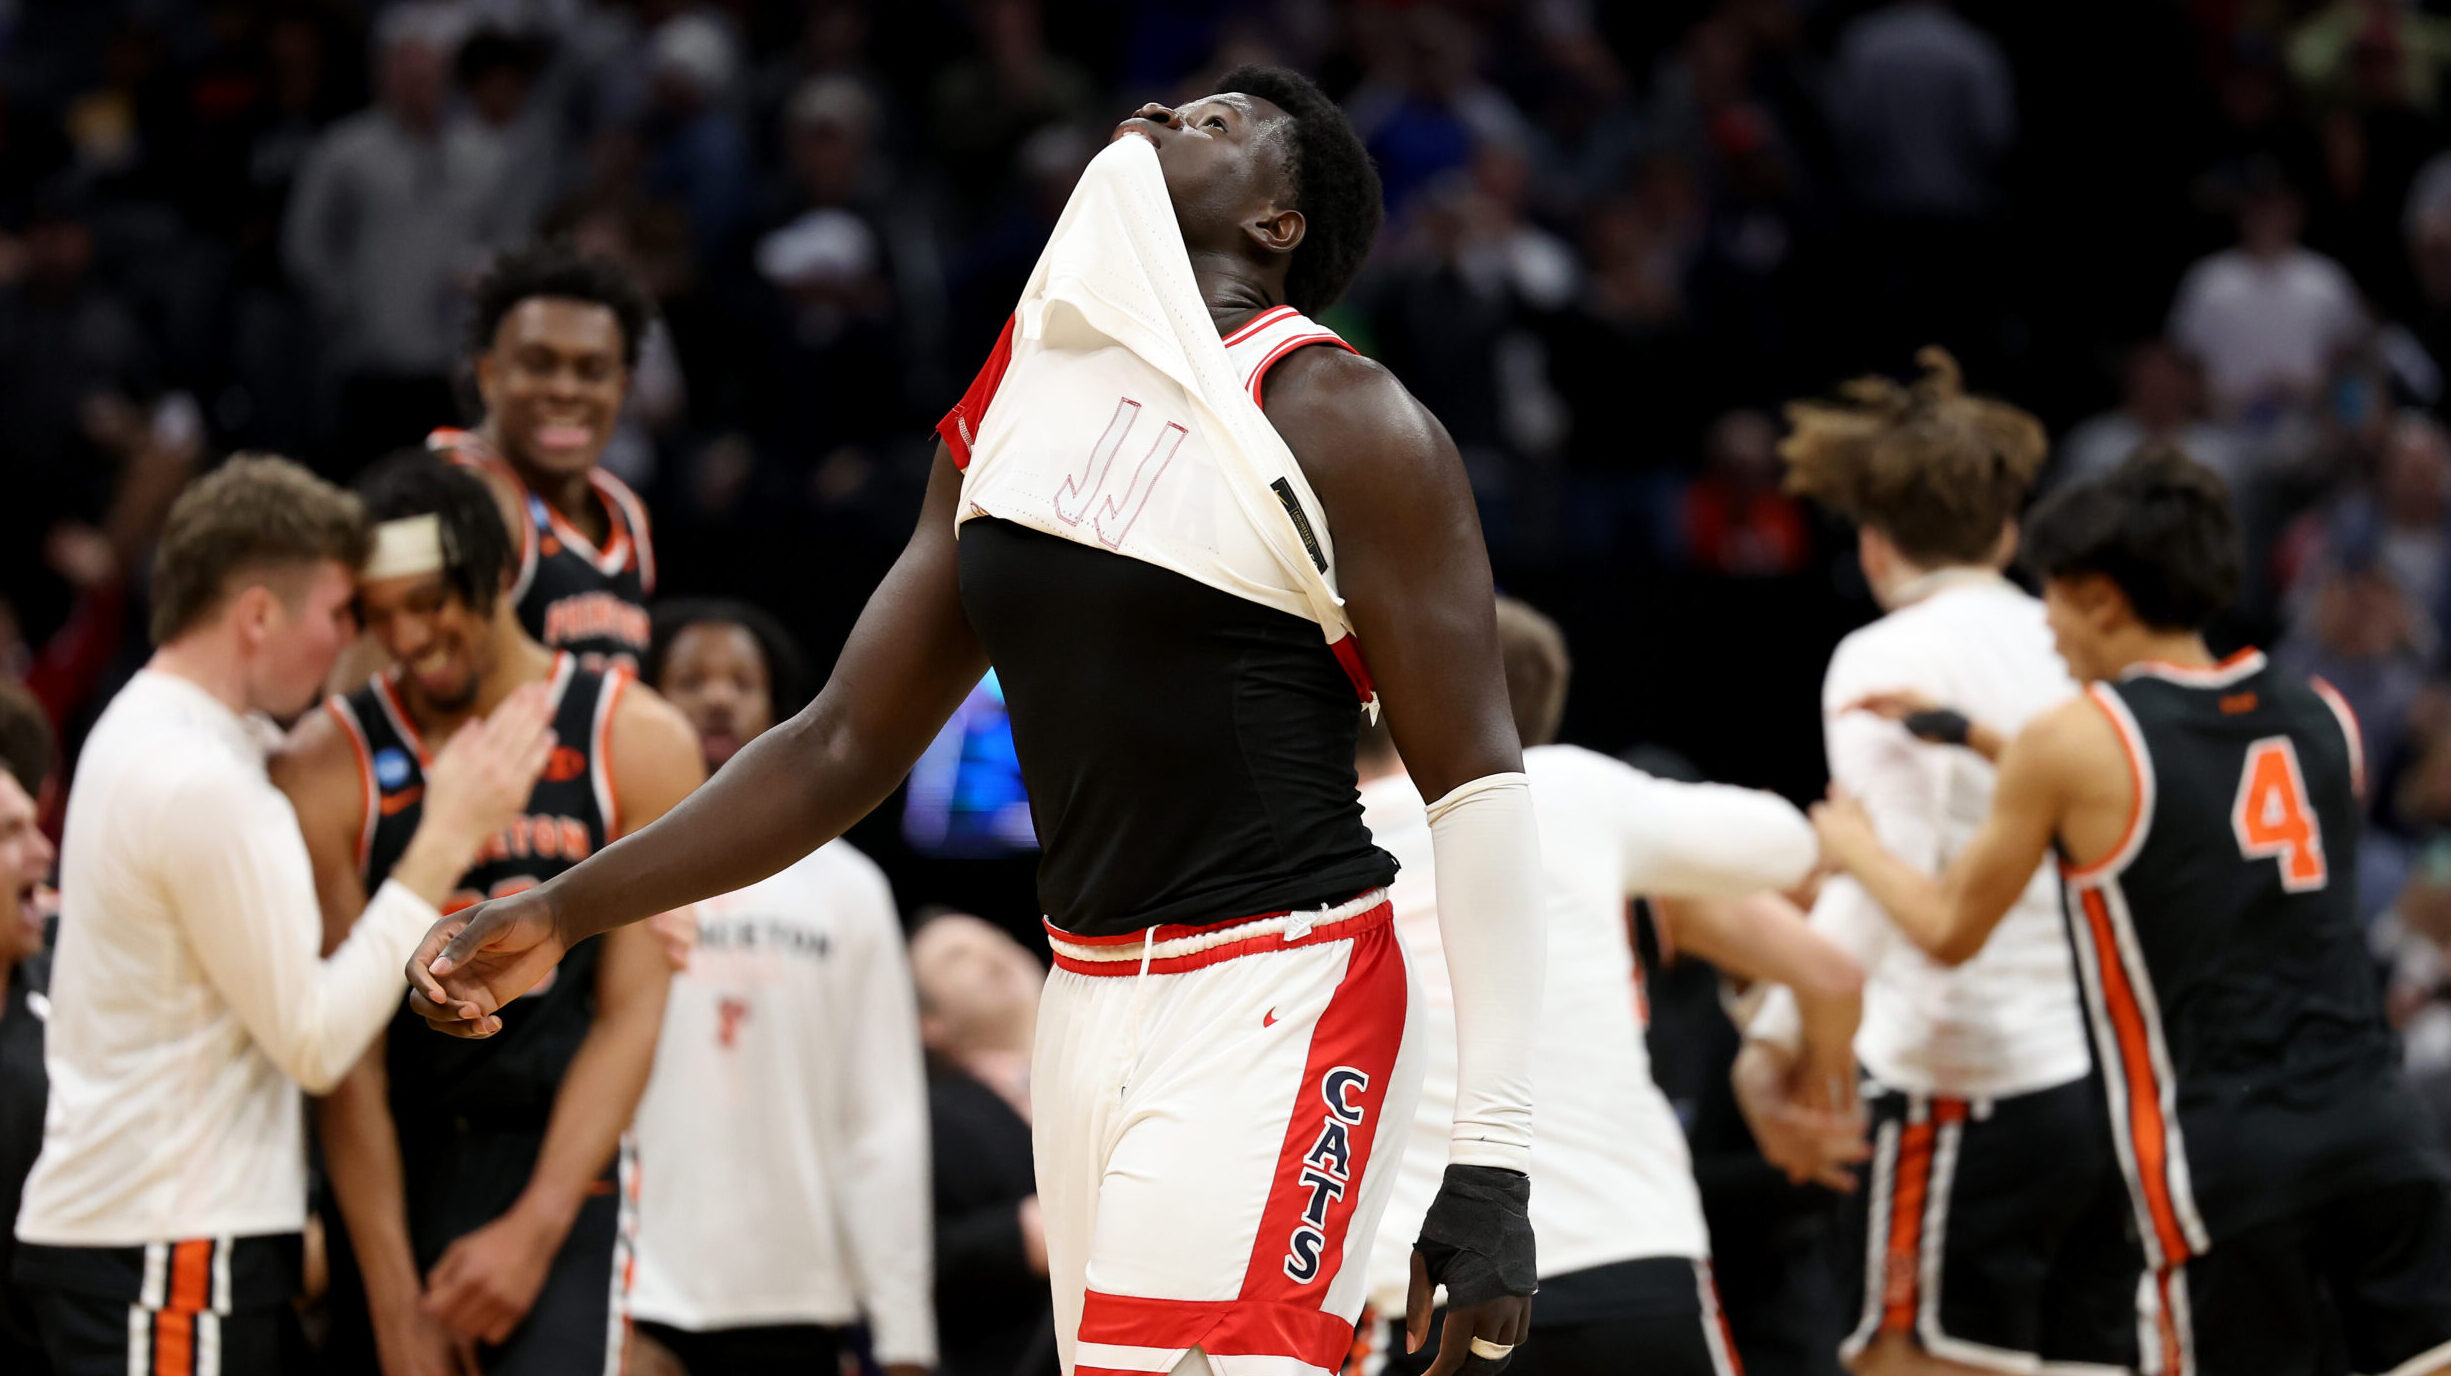 Oumar Ballo #11 of the Arizona Wildcats reacts as the Princeton Tigers celebrate after defeating th...